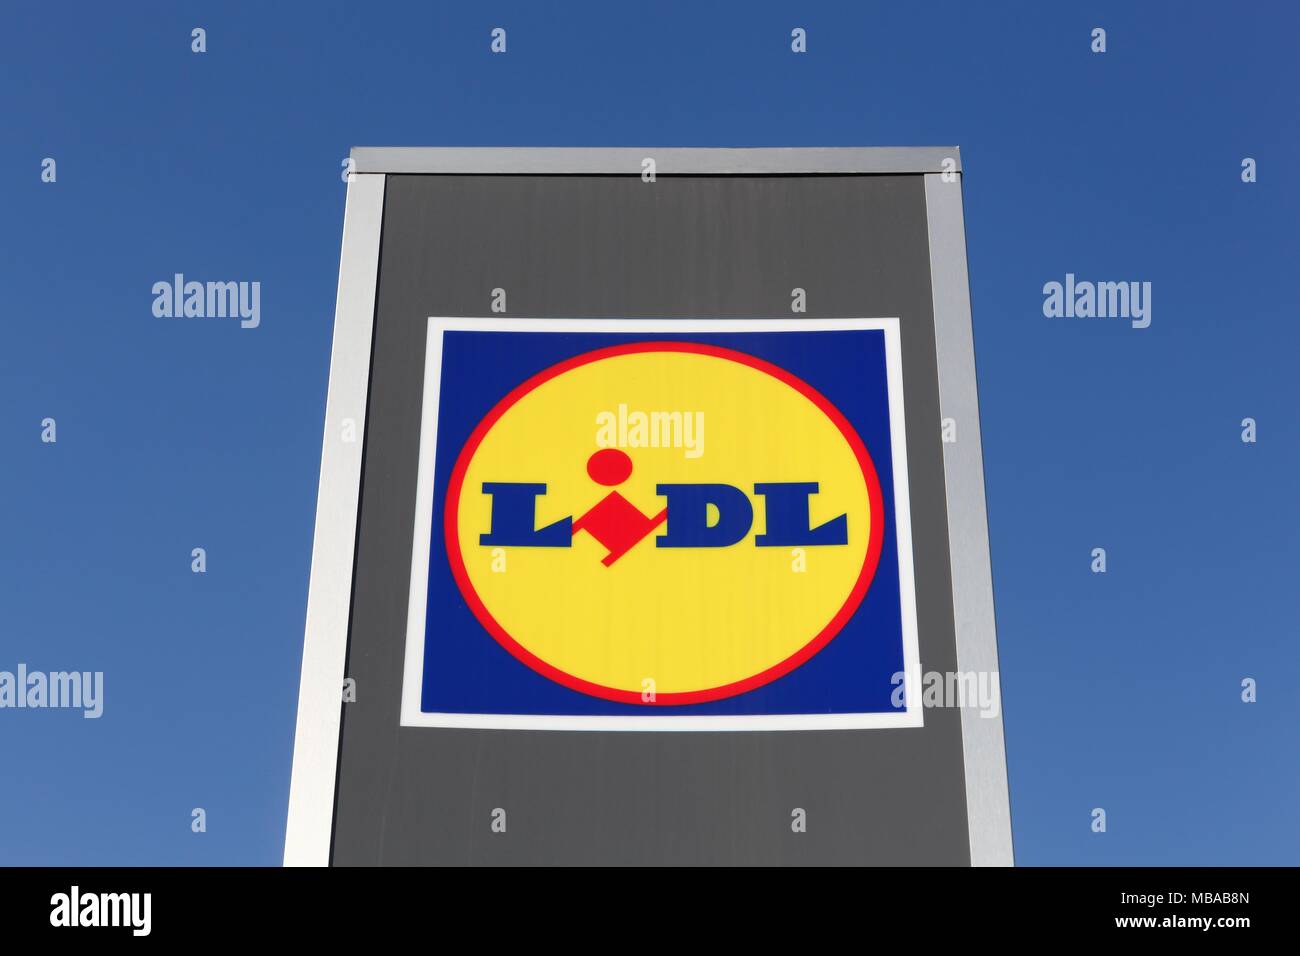 Belleville, France - March 20, 2018: Lidl logo on a panel. Lidl is a german global discount supermarket chain Stock Photo